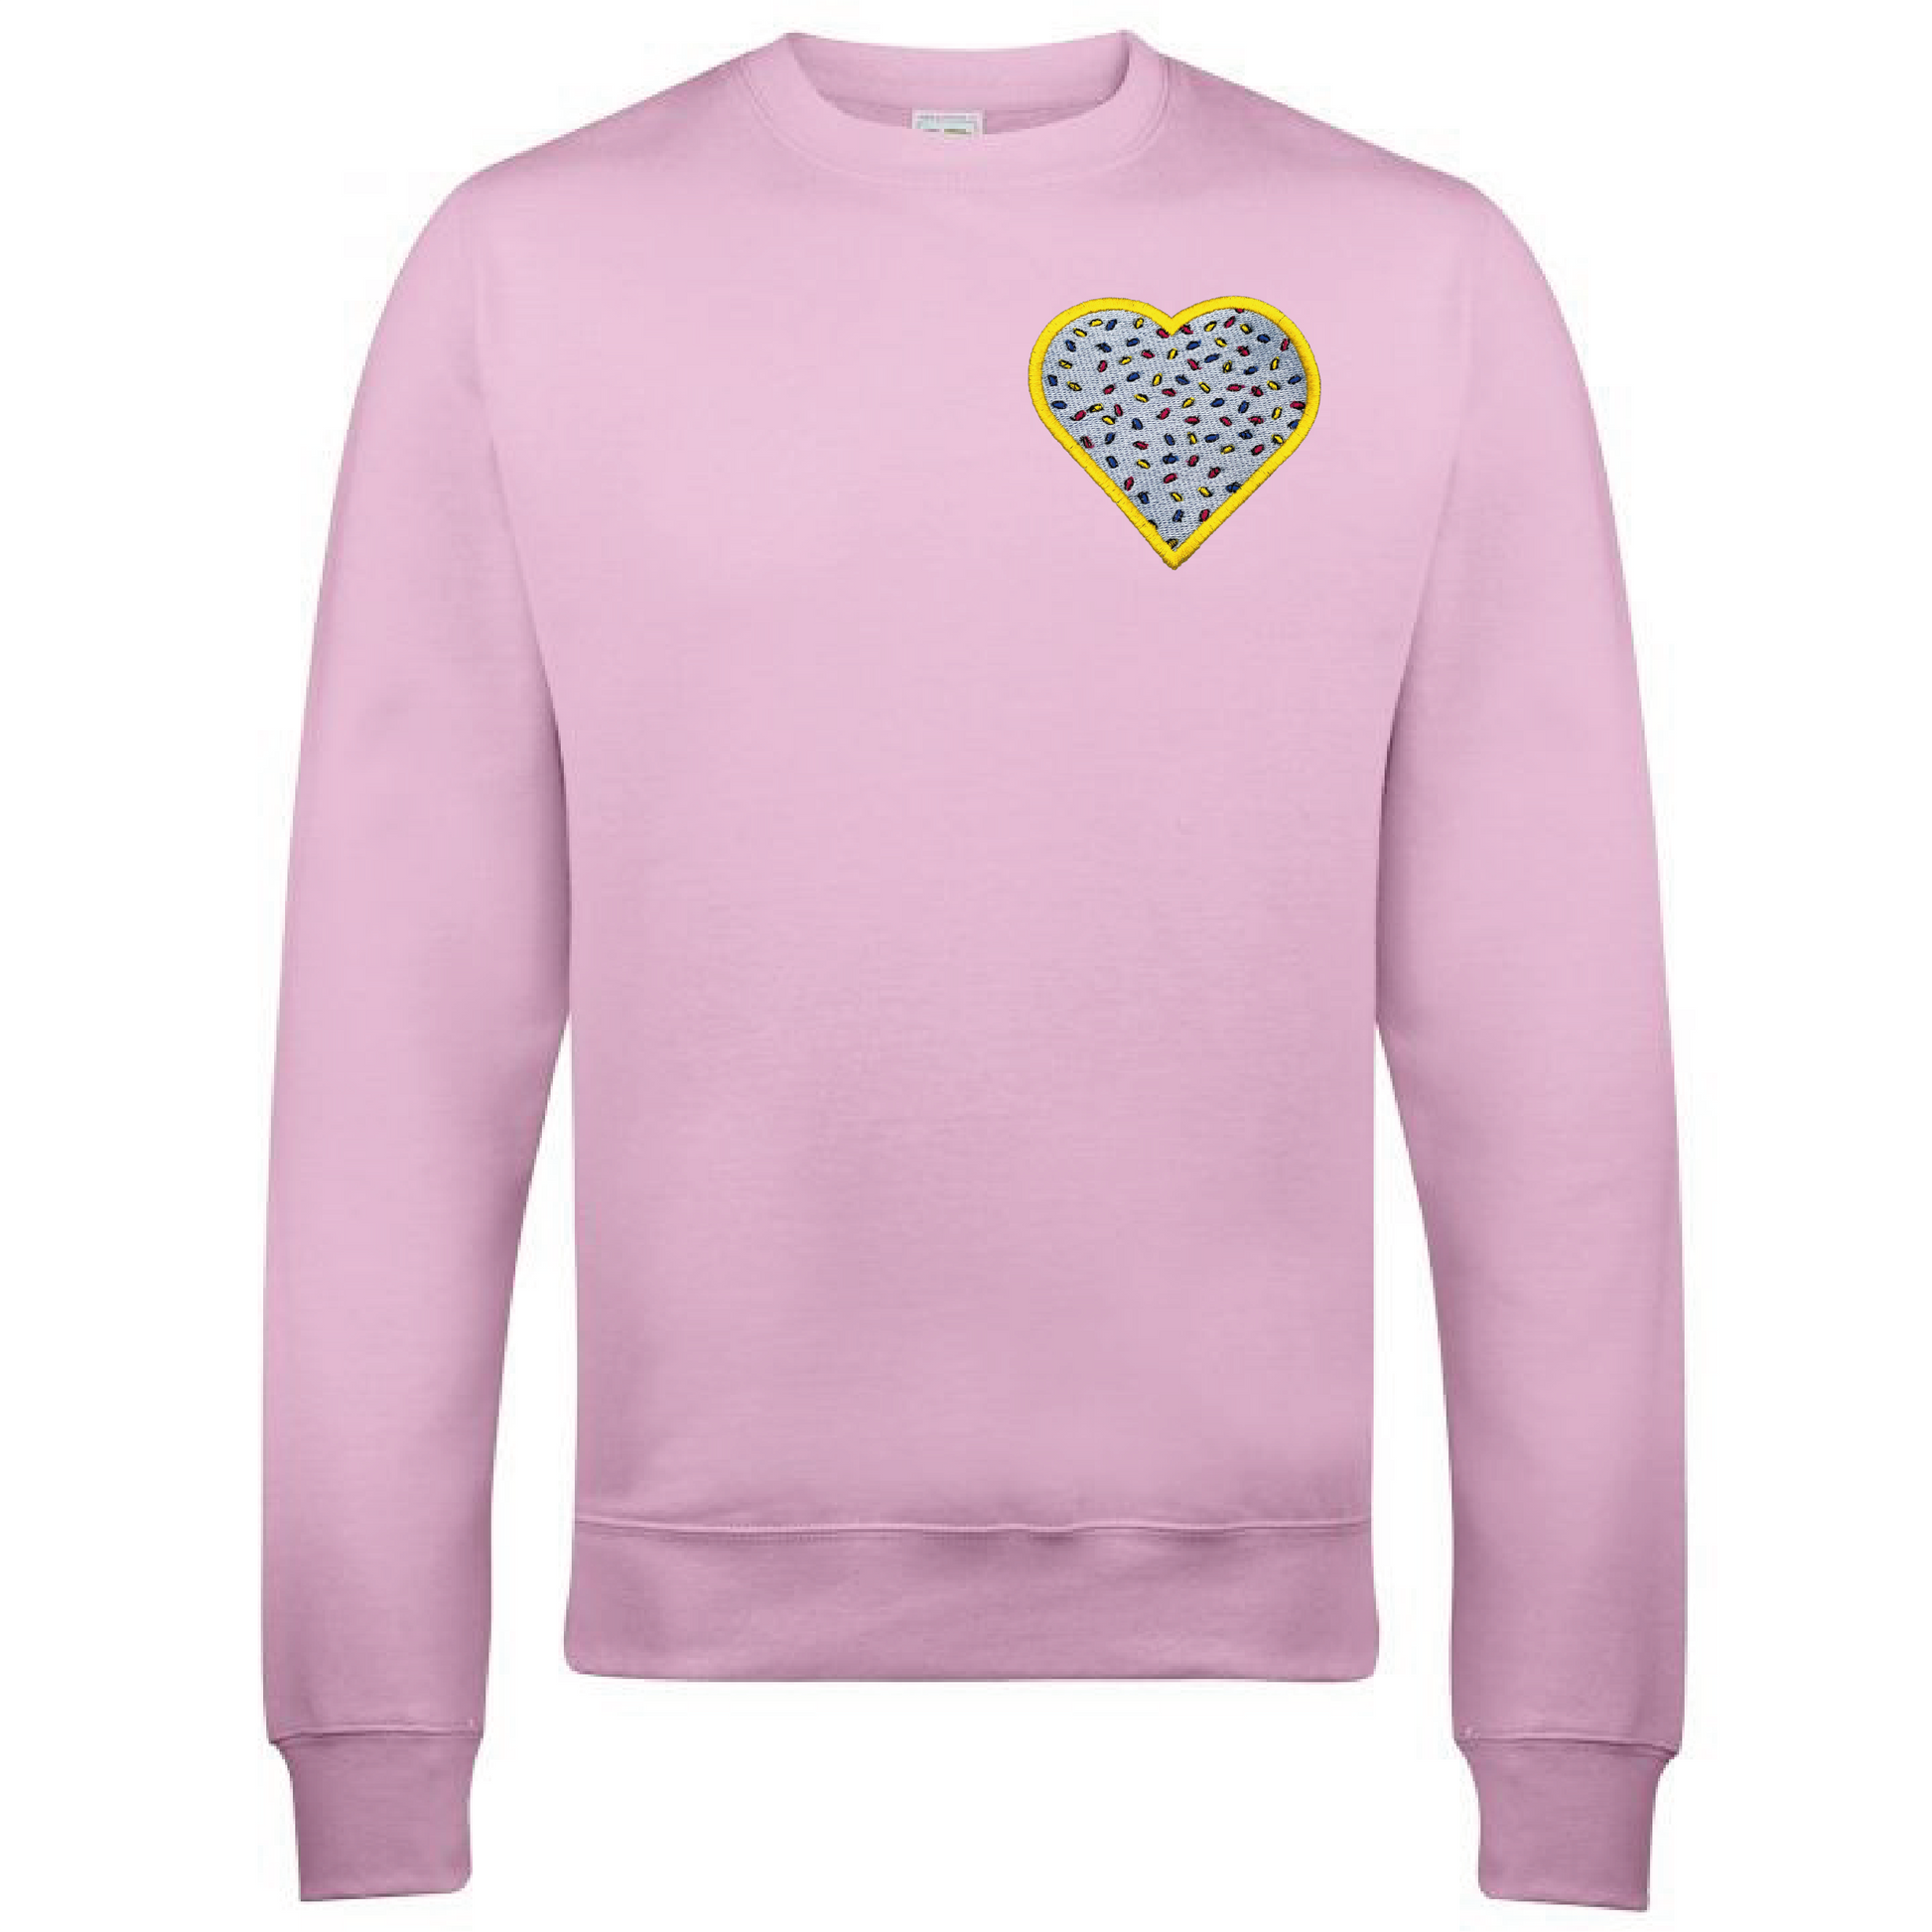 blue sprinkles for days matching embroidered sweater